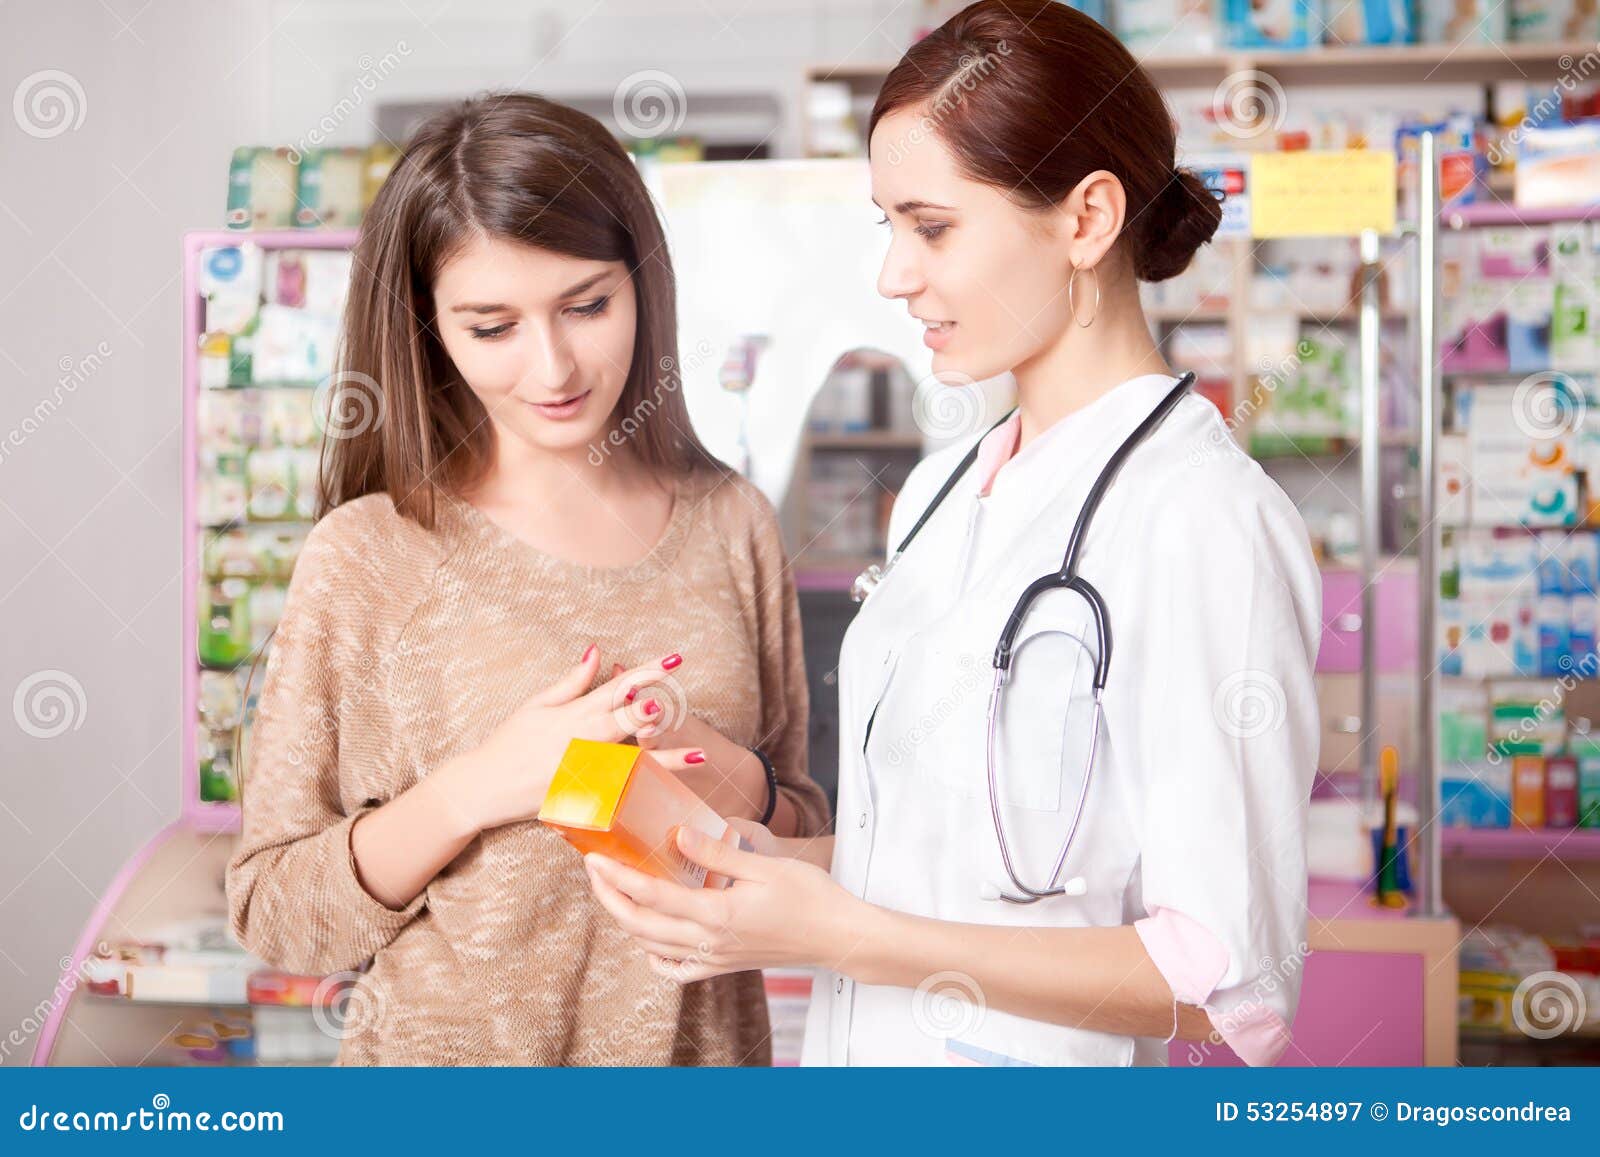 Woman Doctor and Client Inside Pharmacy Stock Image - Image of ...